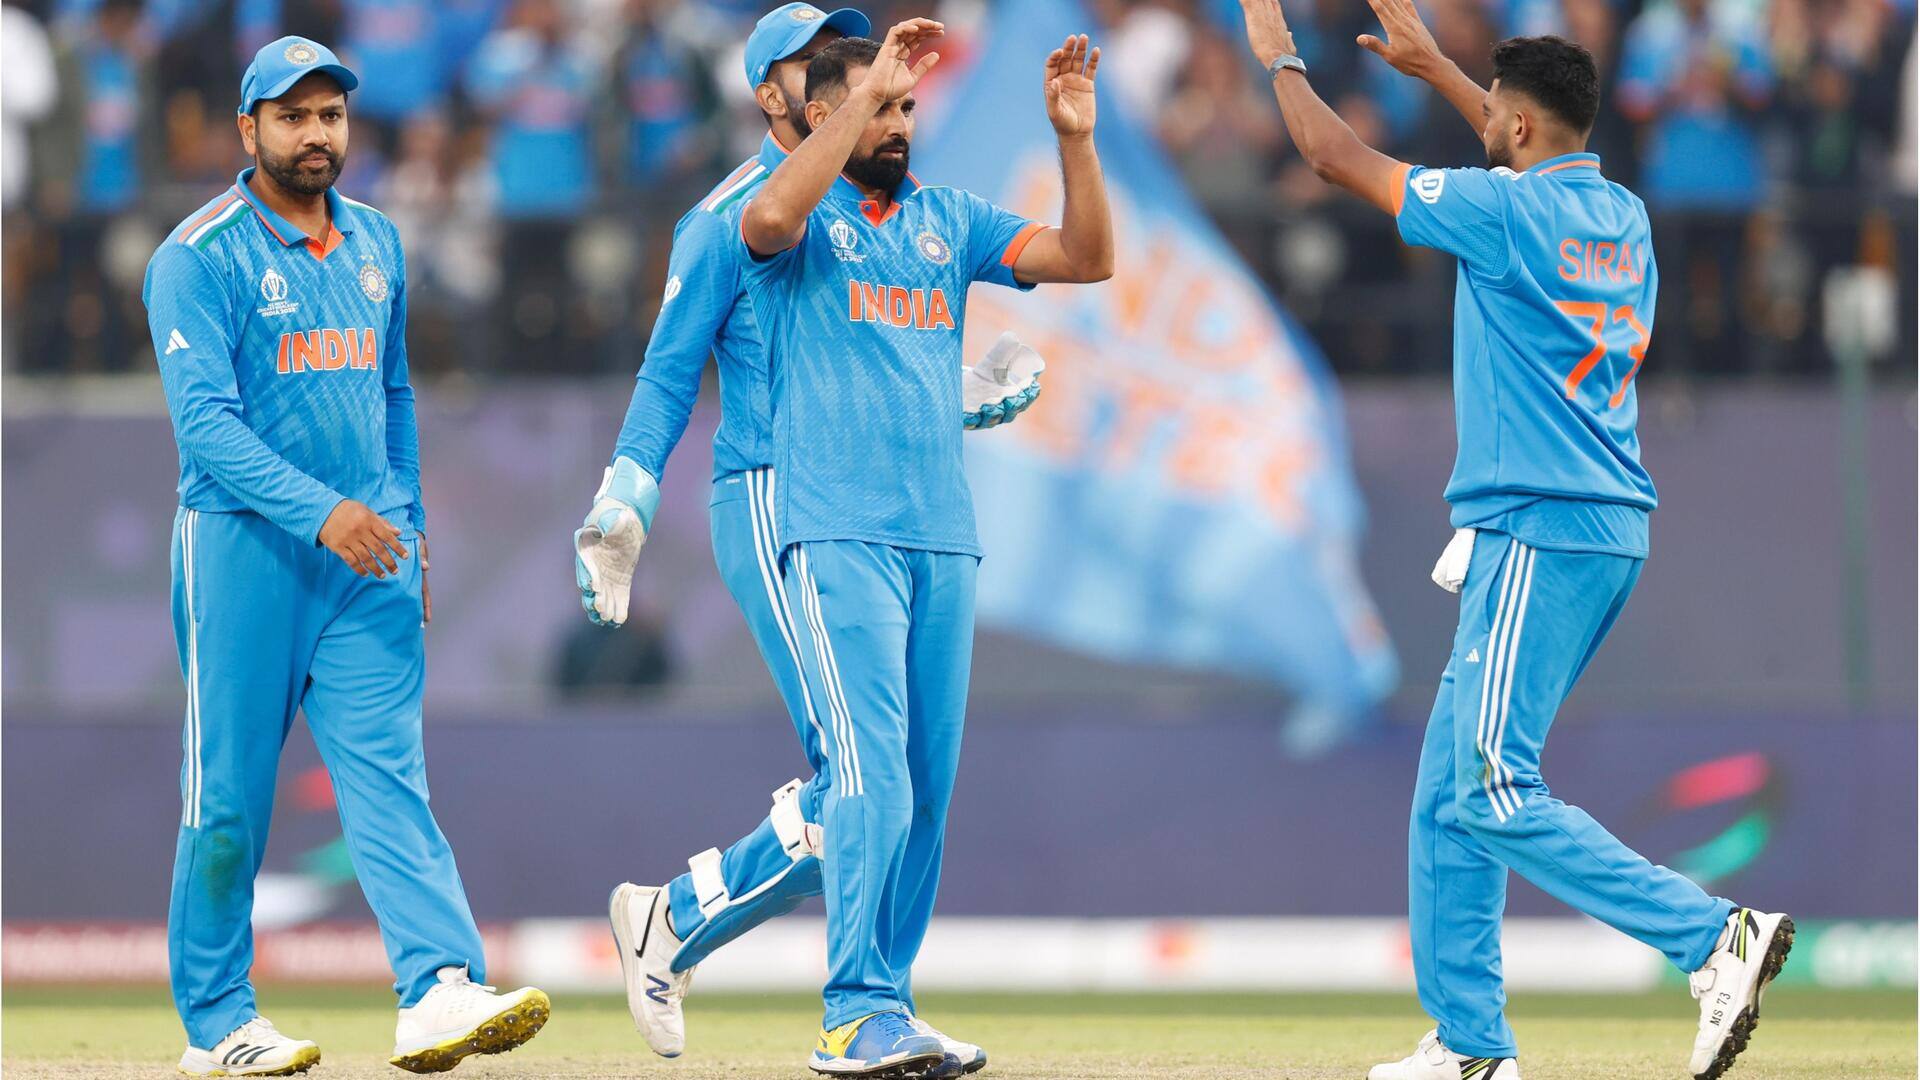 Mohammed Shami: Decoding his best ICC World Cup bowling spells